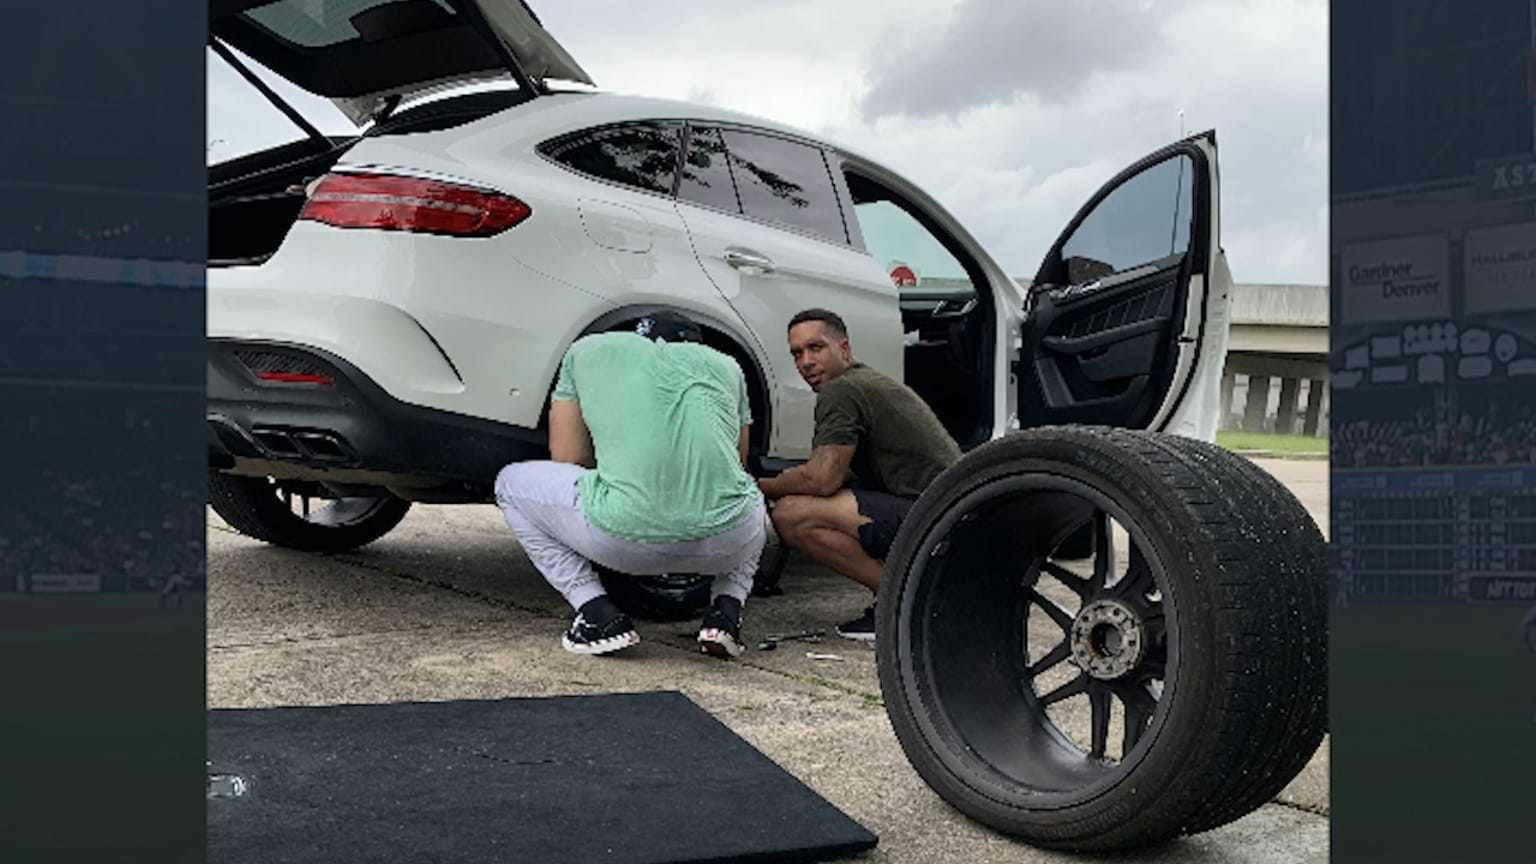 George Springer and Michael Brantley change a flat on way to